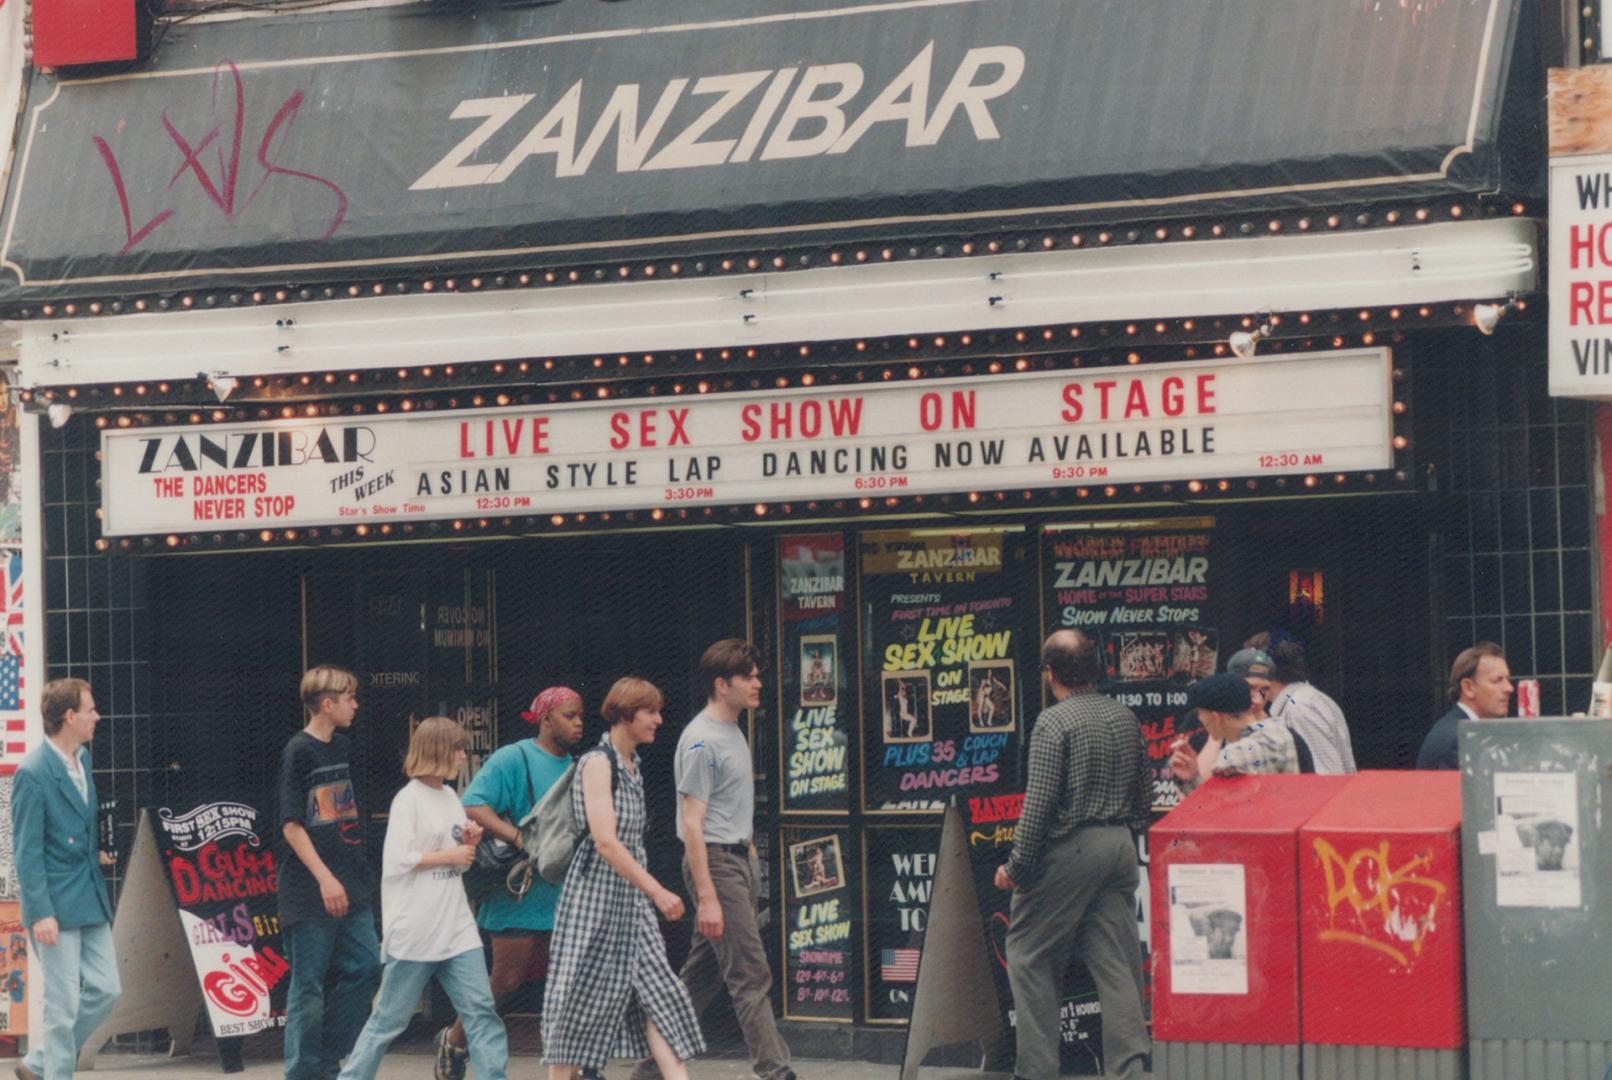 Live sex show: Yonge St. shoppers pass the Zanzibar Tavern, which boldly advertises what critics say is an inevitable progression from lap dancing